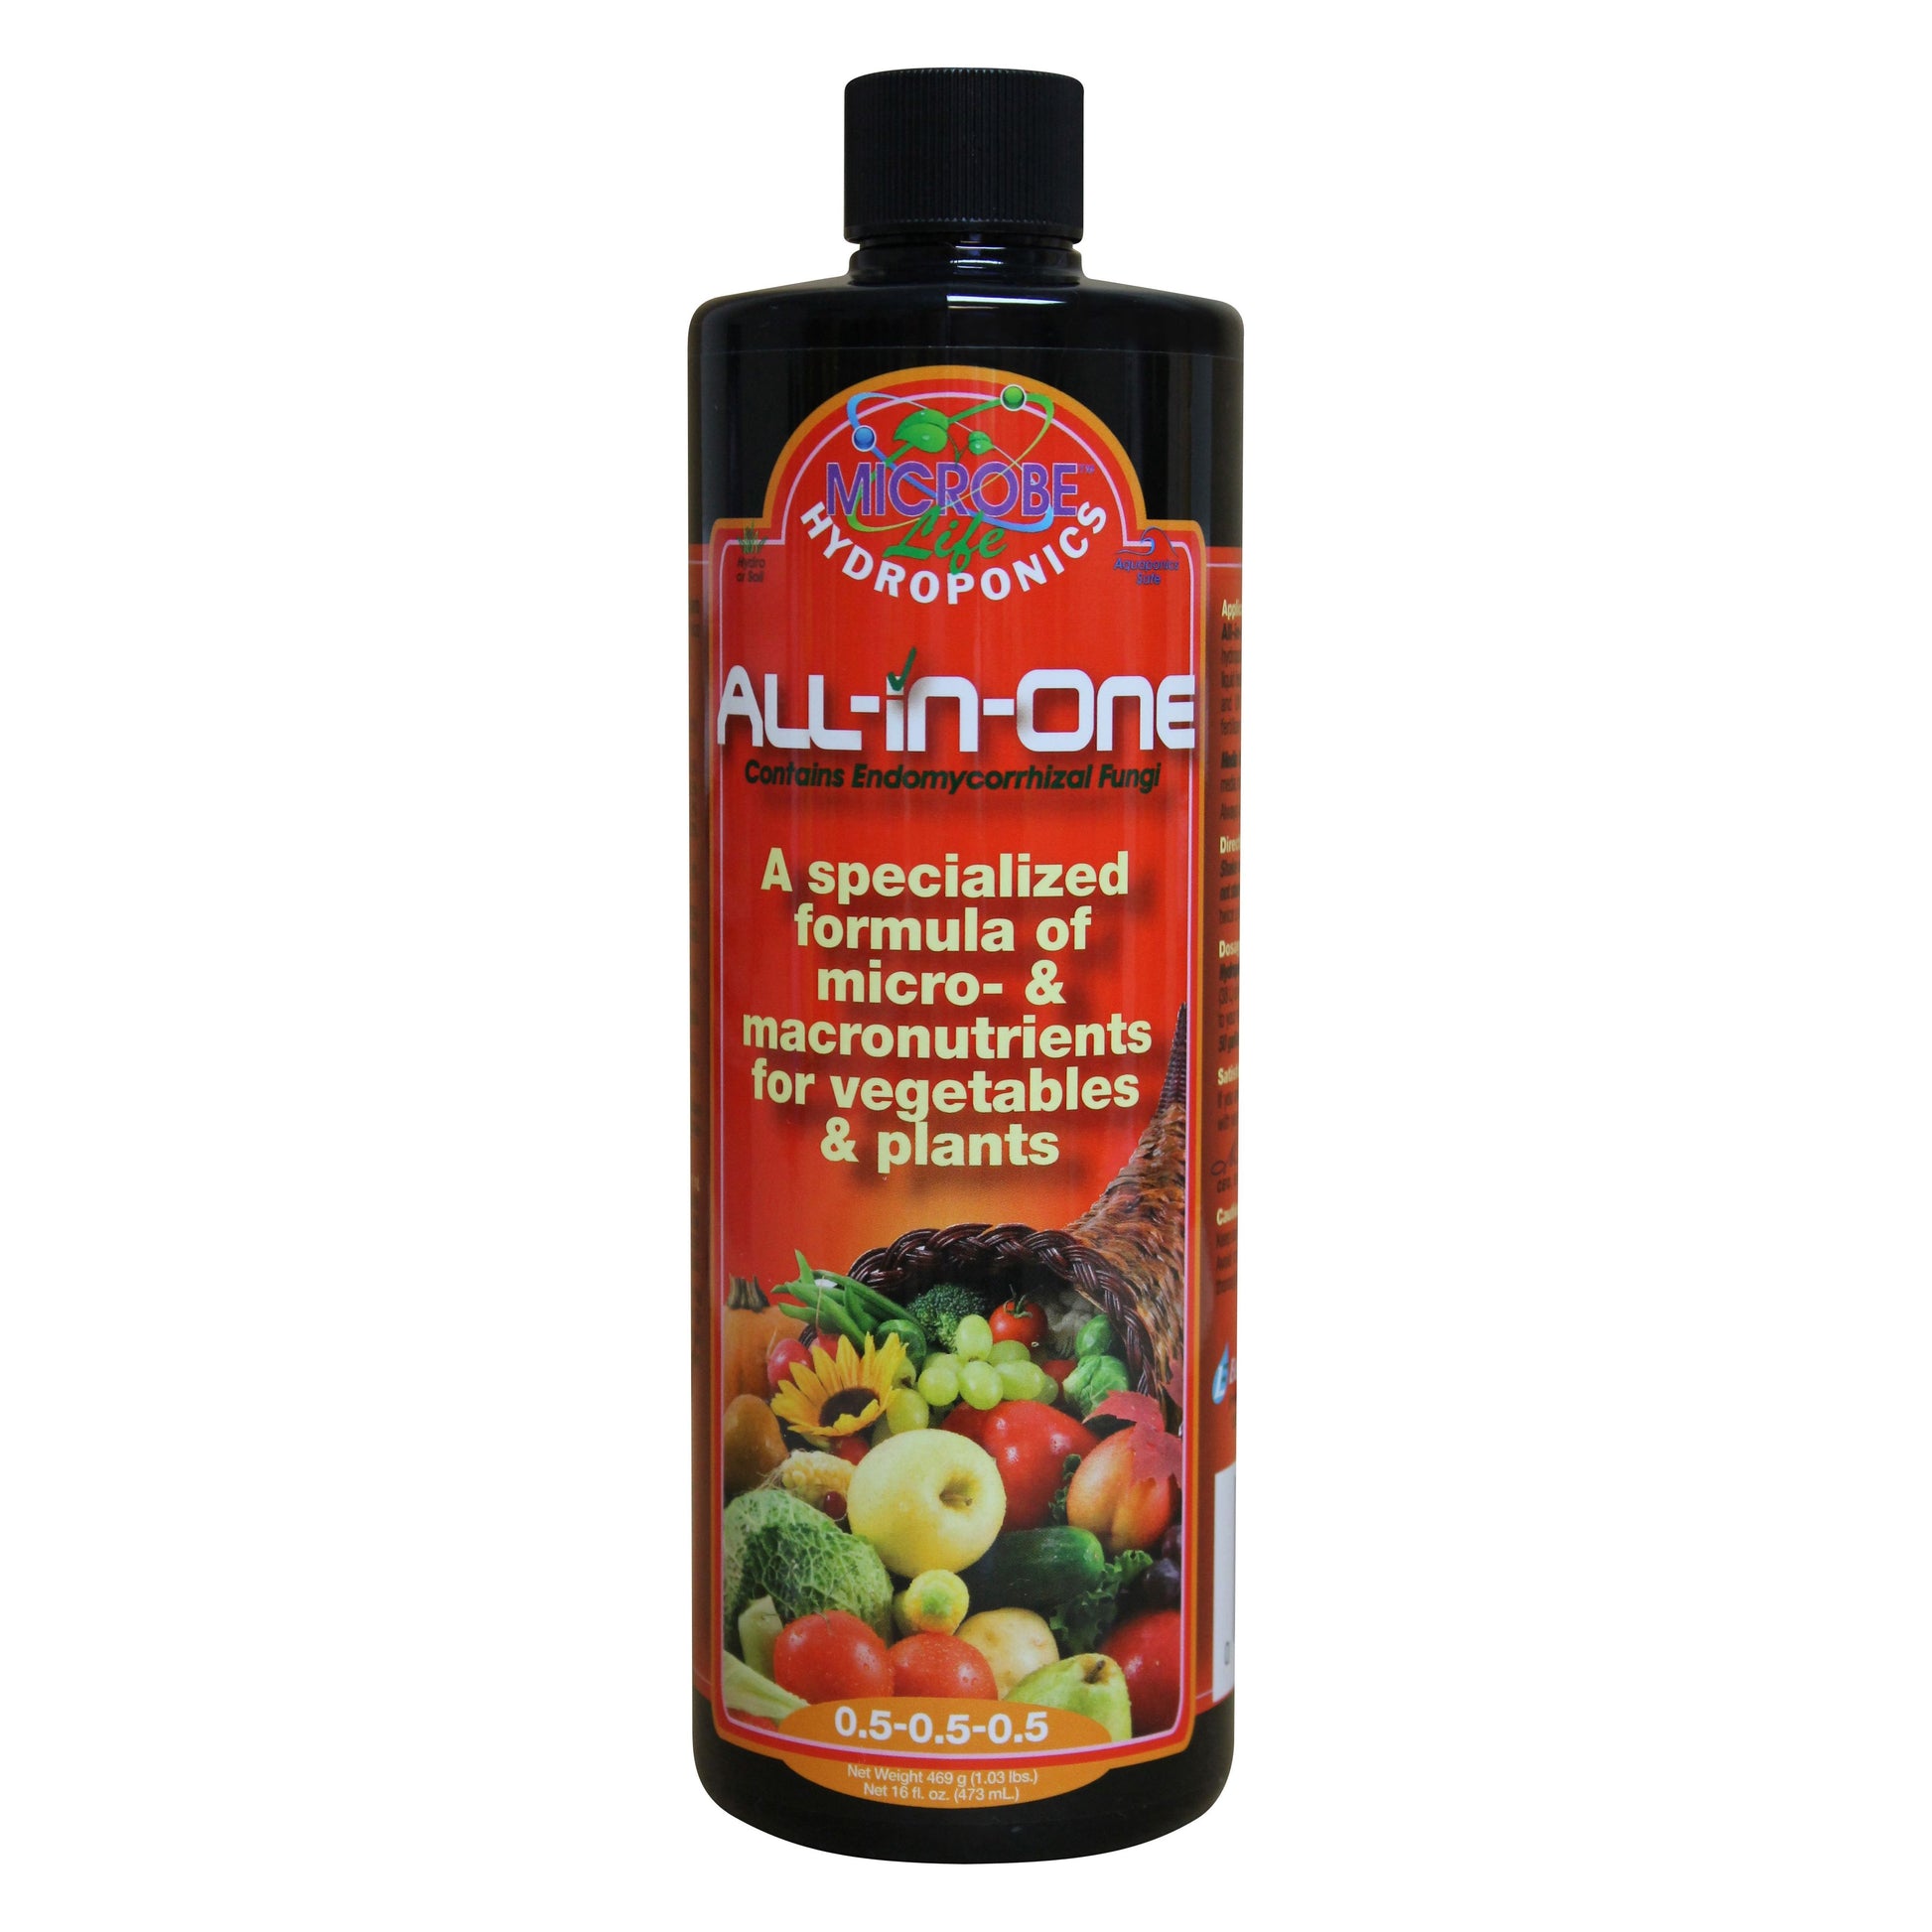 All-In-One by Microbe Life Hydroponics, 16 oz.